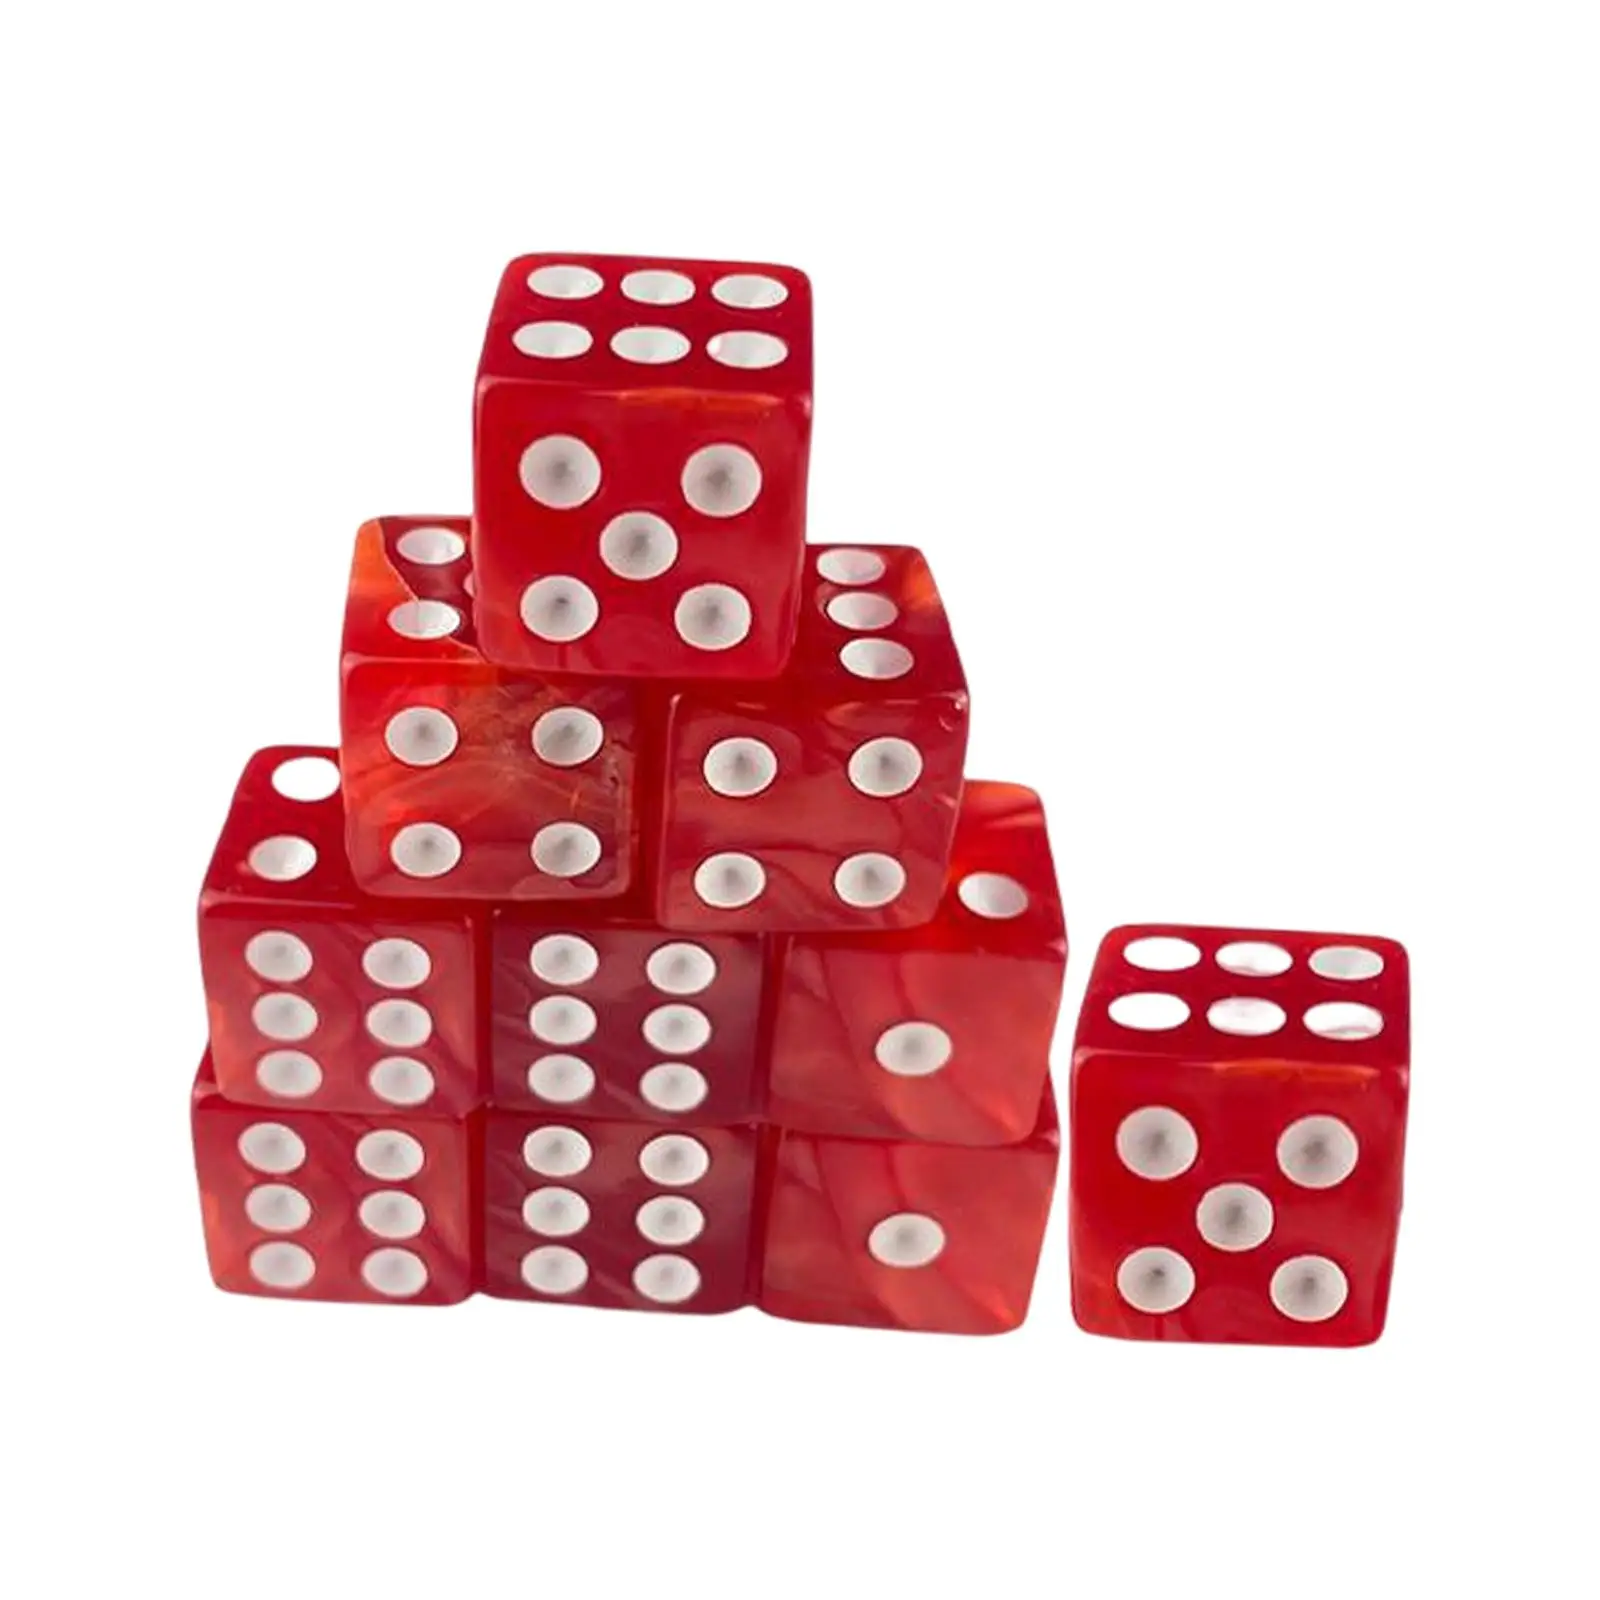 10Pcs Round Corner Dice 0.6inch Teaching Aids Game Dices for Role Play Party